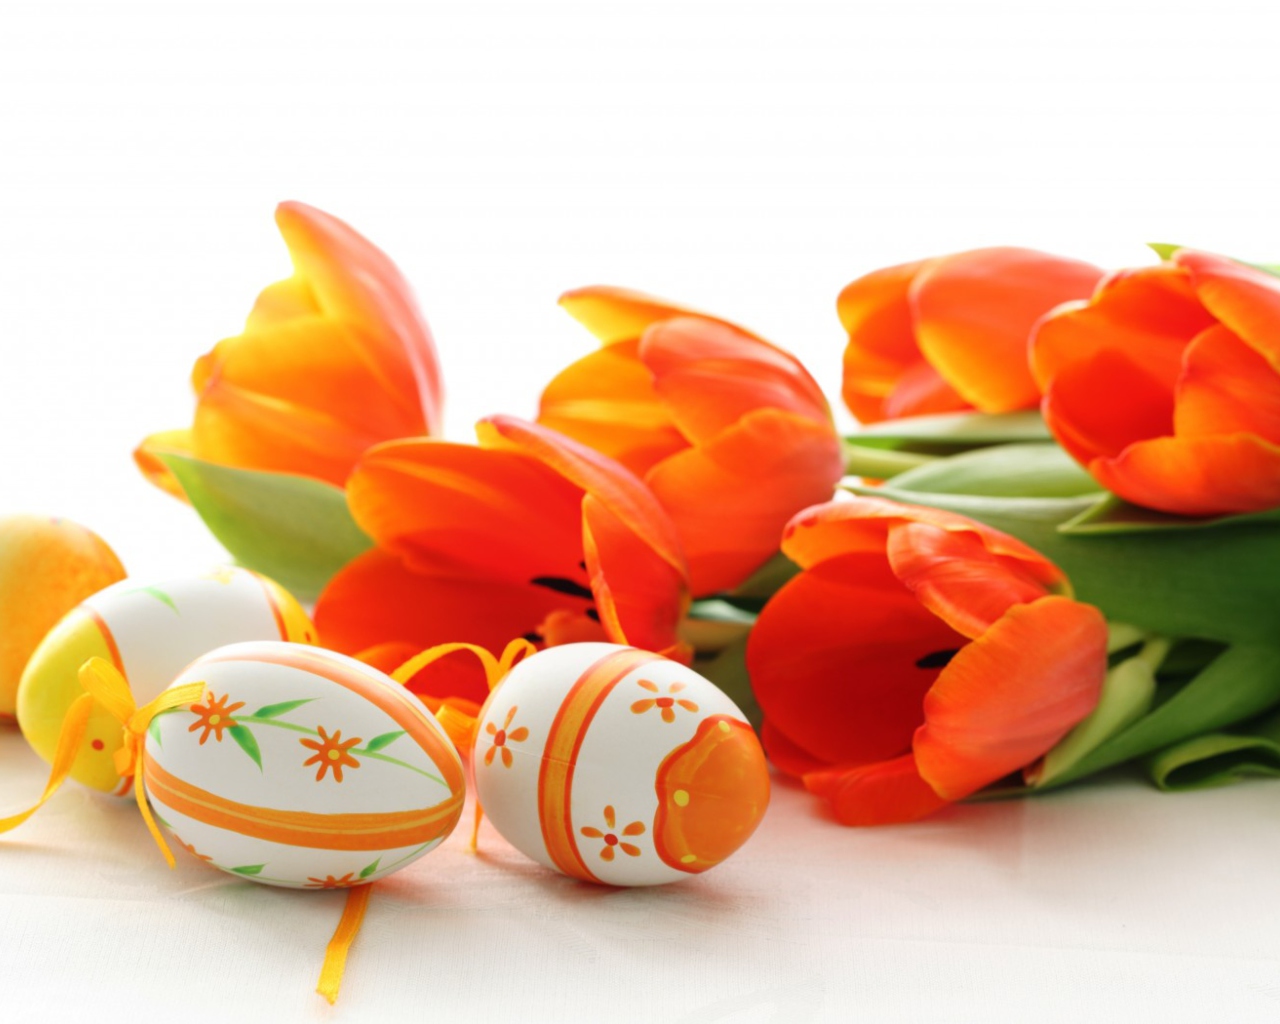 Eggs And Tulips wallpaper 1280x1024